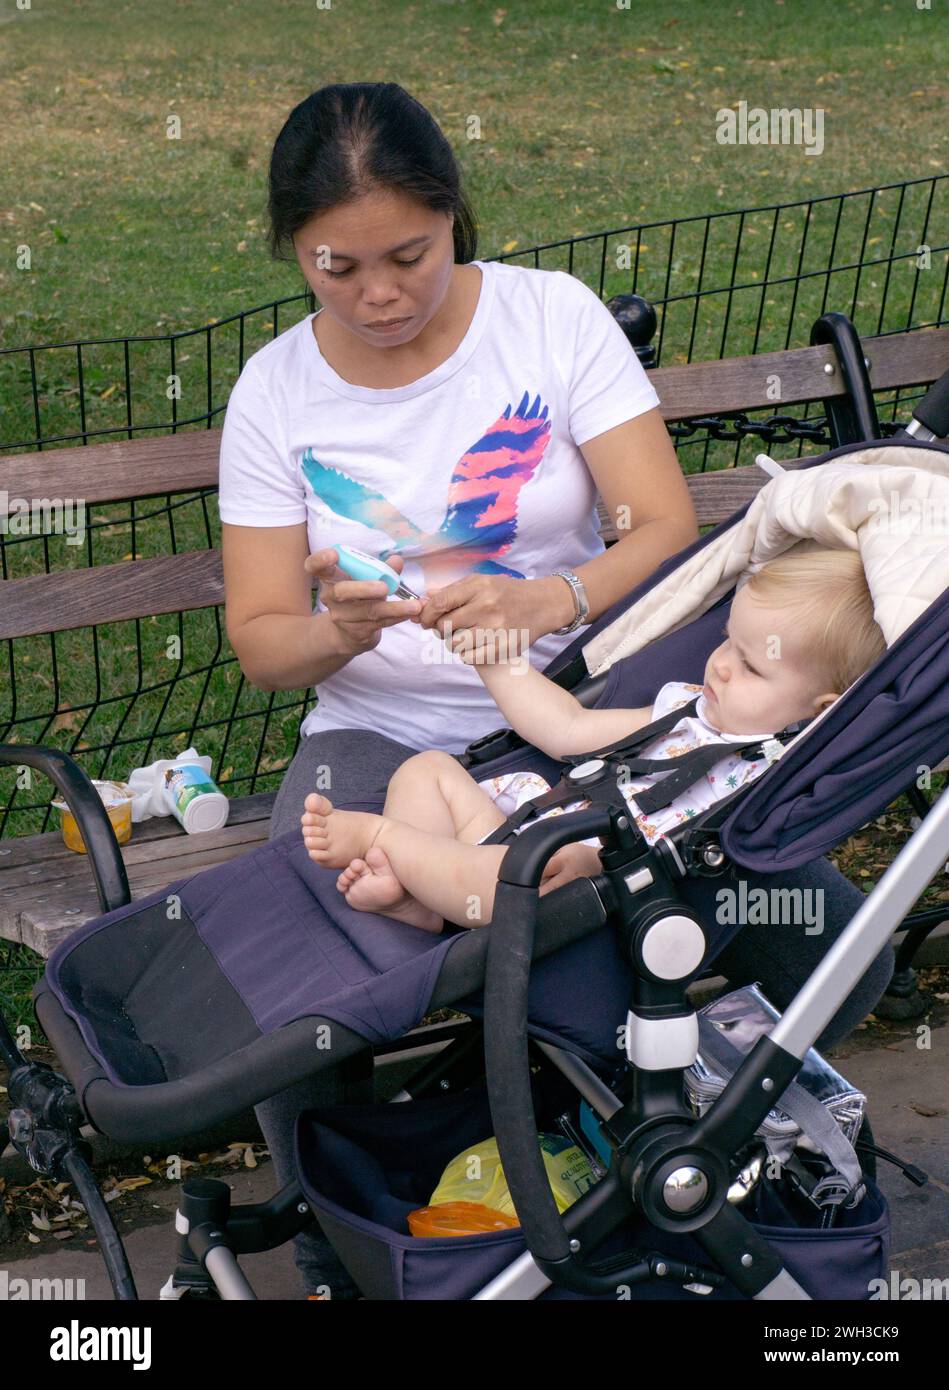 A nanny clips a child's fingernails with what appears to be a special clipper for kids. He appears unhappy. In Washington Square Park in Manhattan. Stock Photo